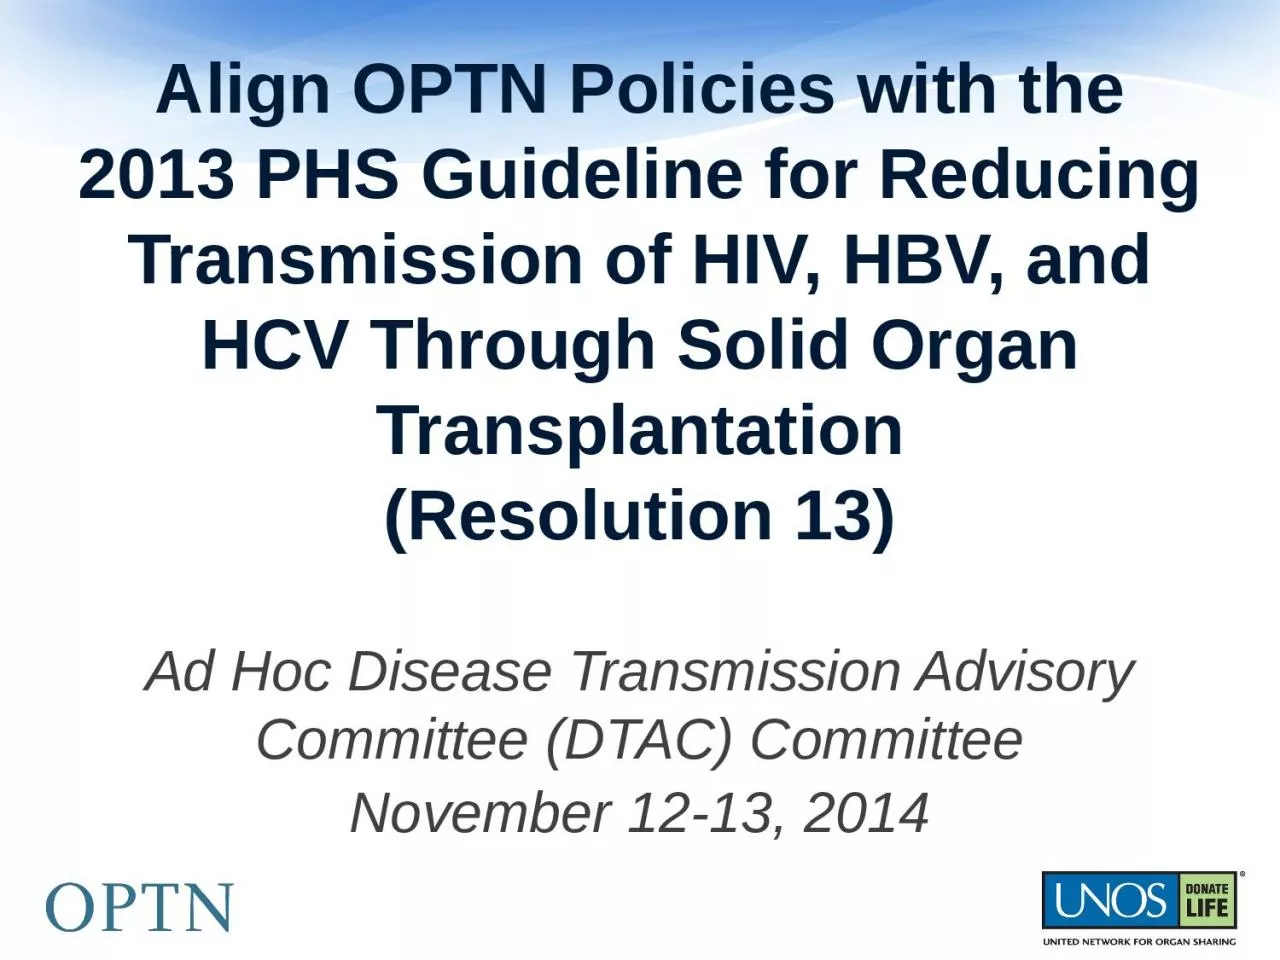 Align OPTN Policies with the 2013 PHS Guideline for Reducing Transmission of HIV, HBV,